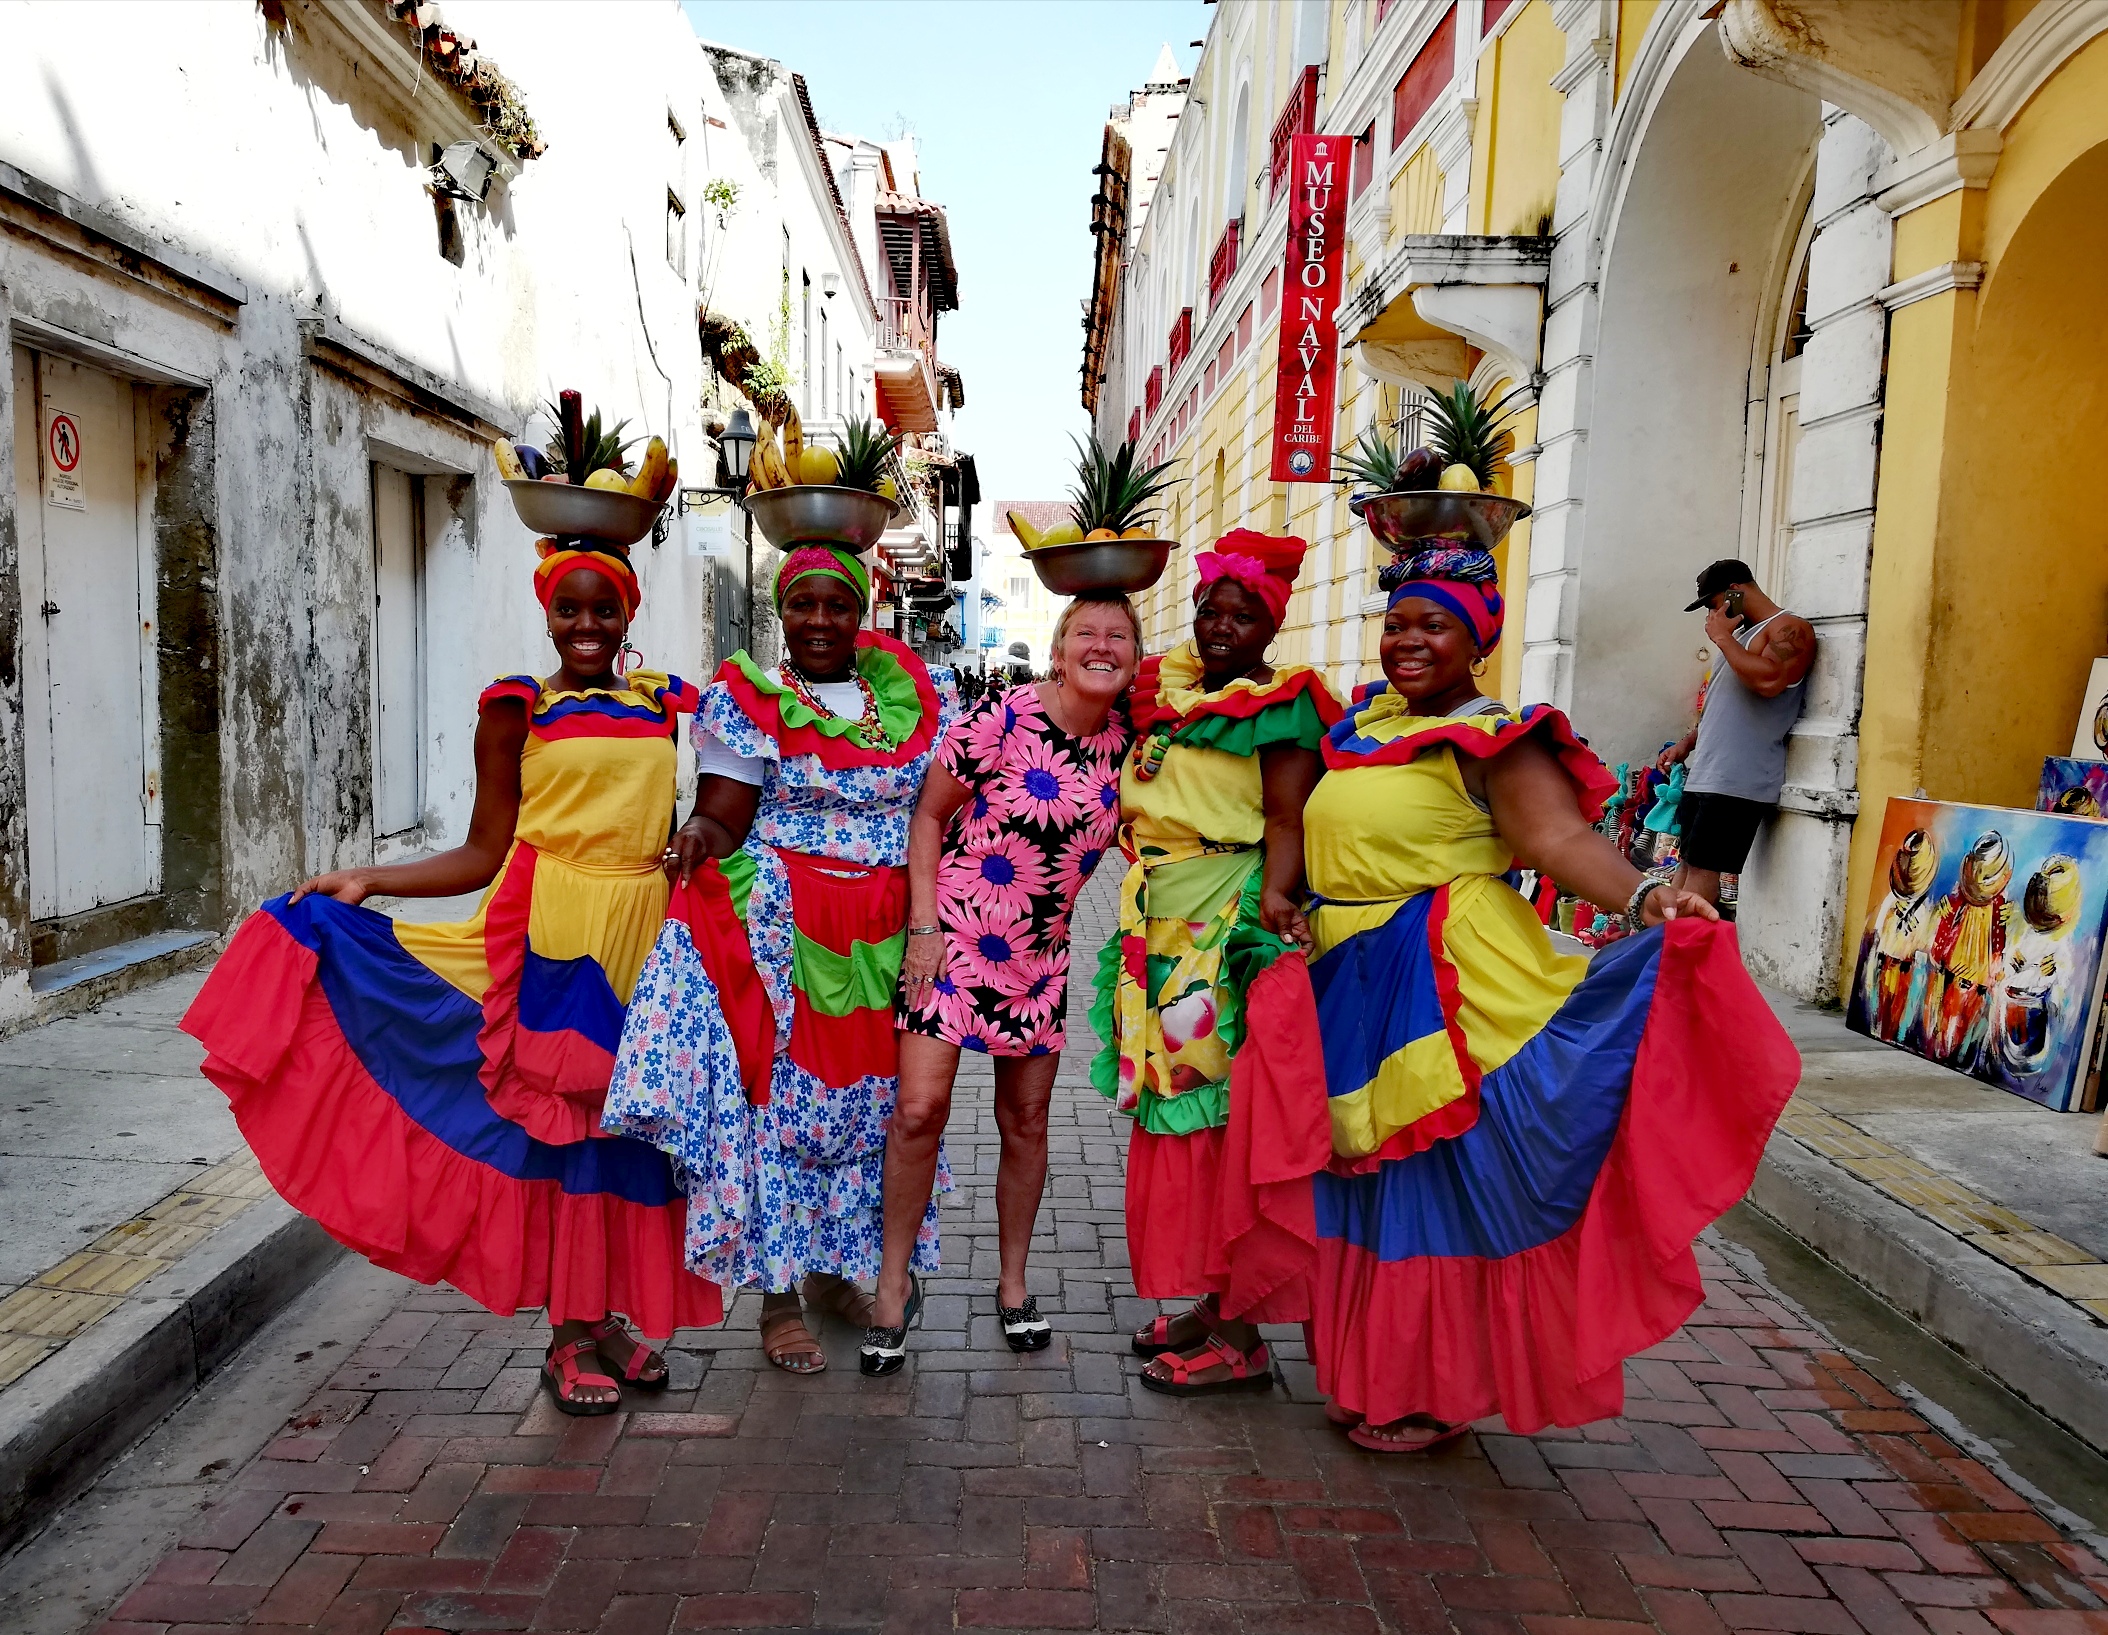 Me with the Palengueras in Cartagena, Colombia